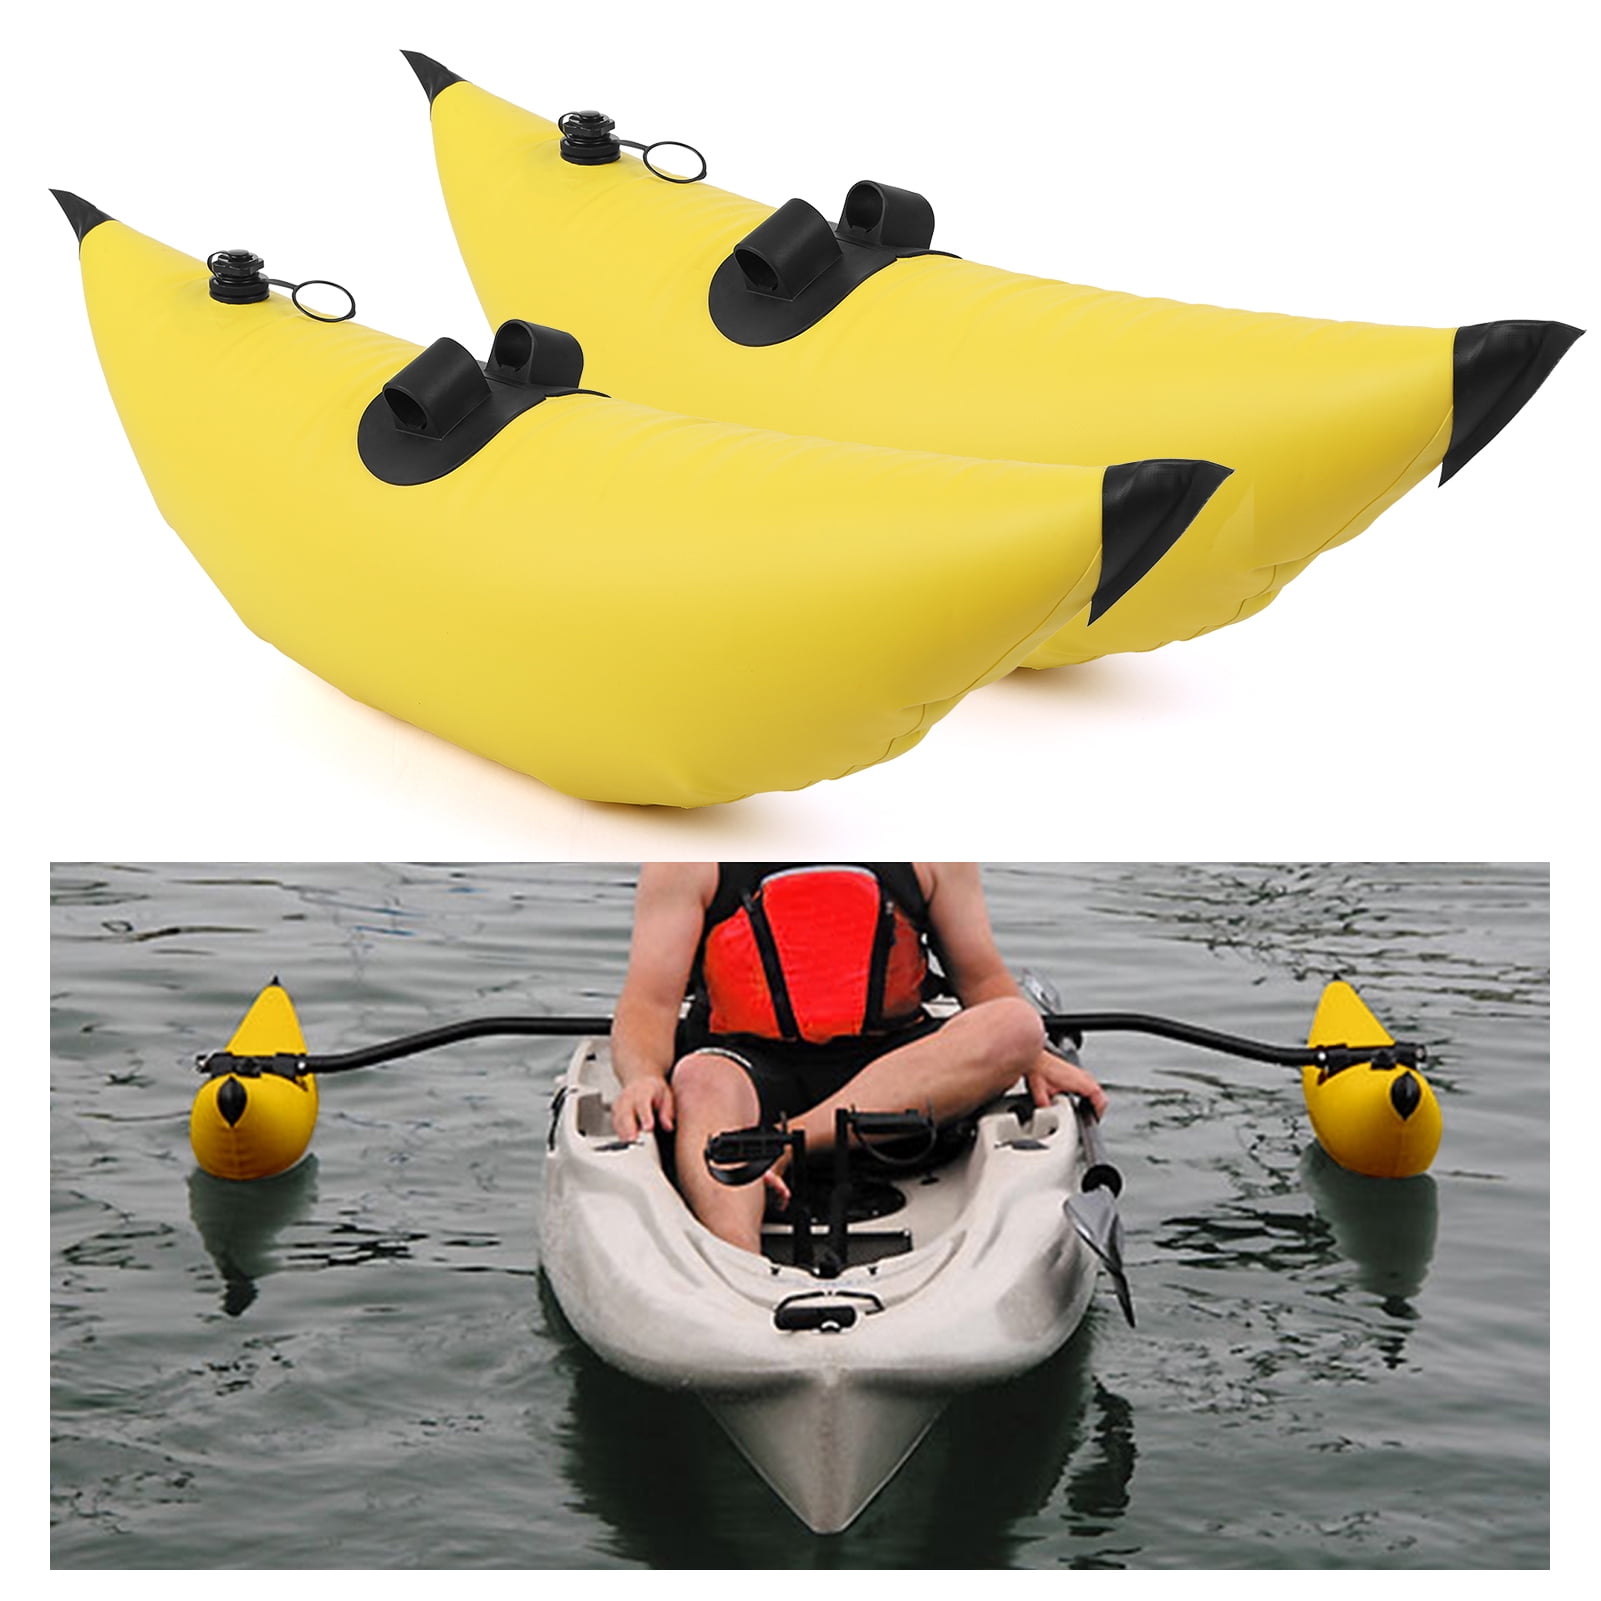 1/2/4x Rubber Boat Side Mount Carry Handles Hand Grip Grab For Kayak Canoe New 